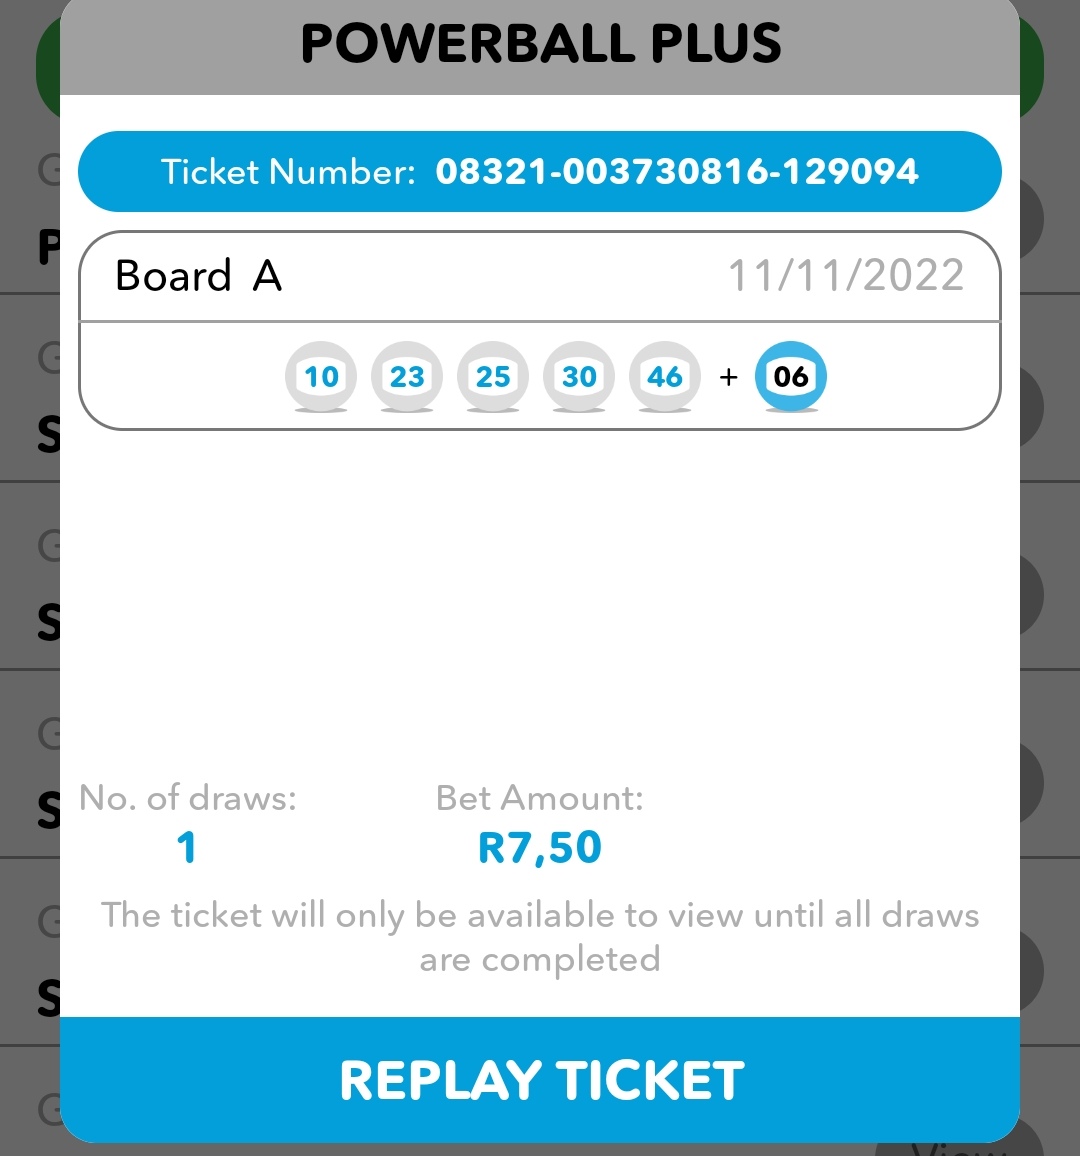 RT @StylesMabuza: @Just_Lungile @tymebankza Played your numbers on powerball, if they come out, DM me https://t.co/hNX5SMkpzA